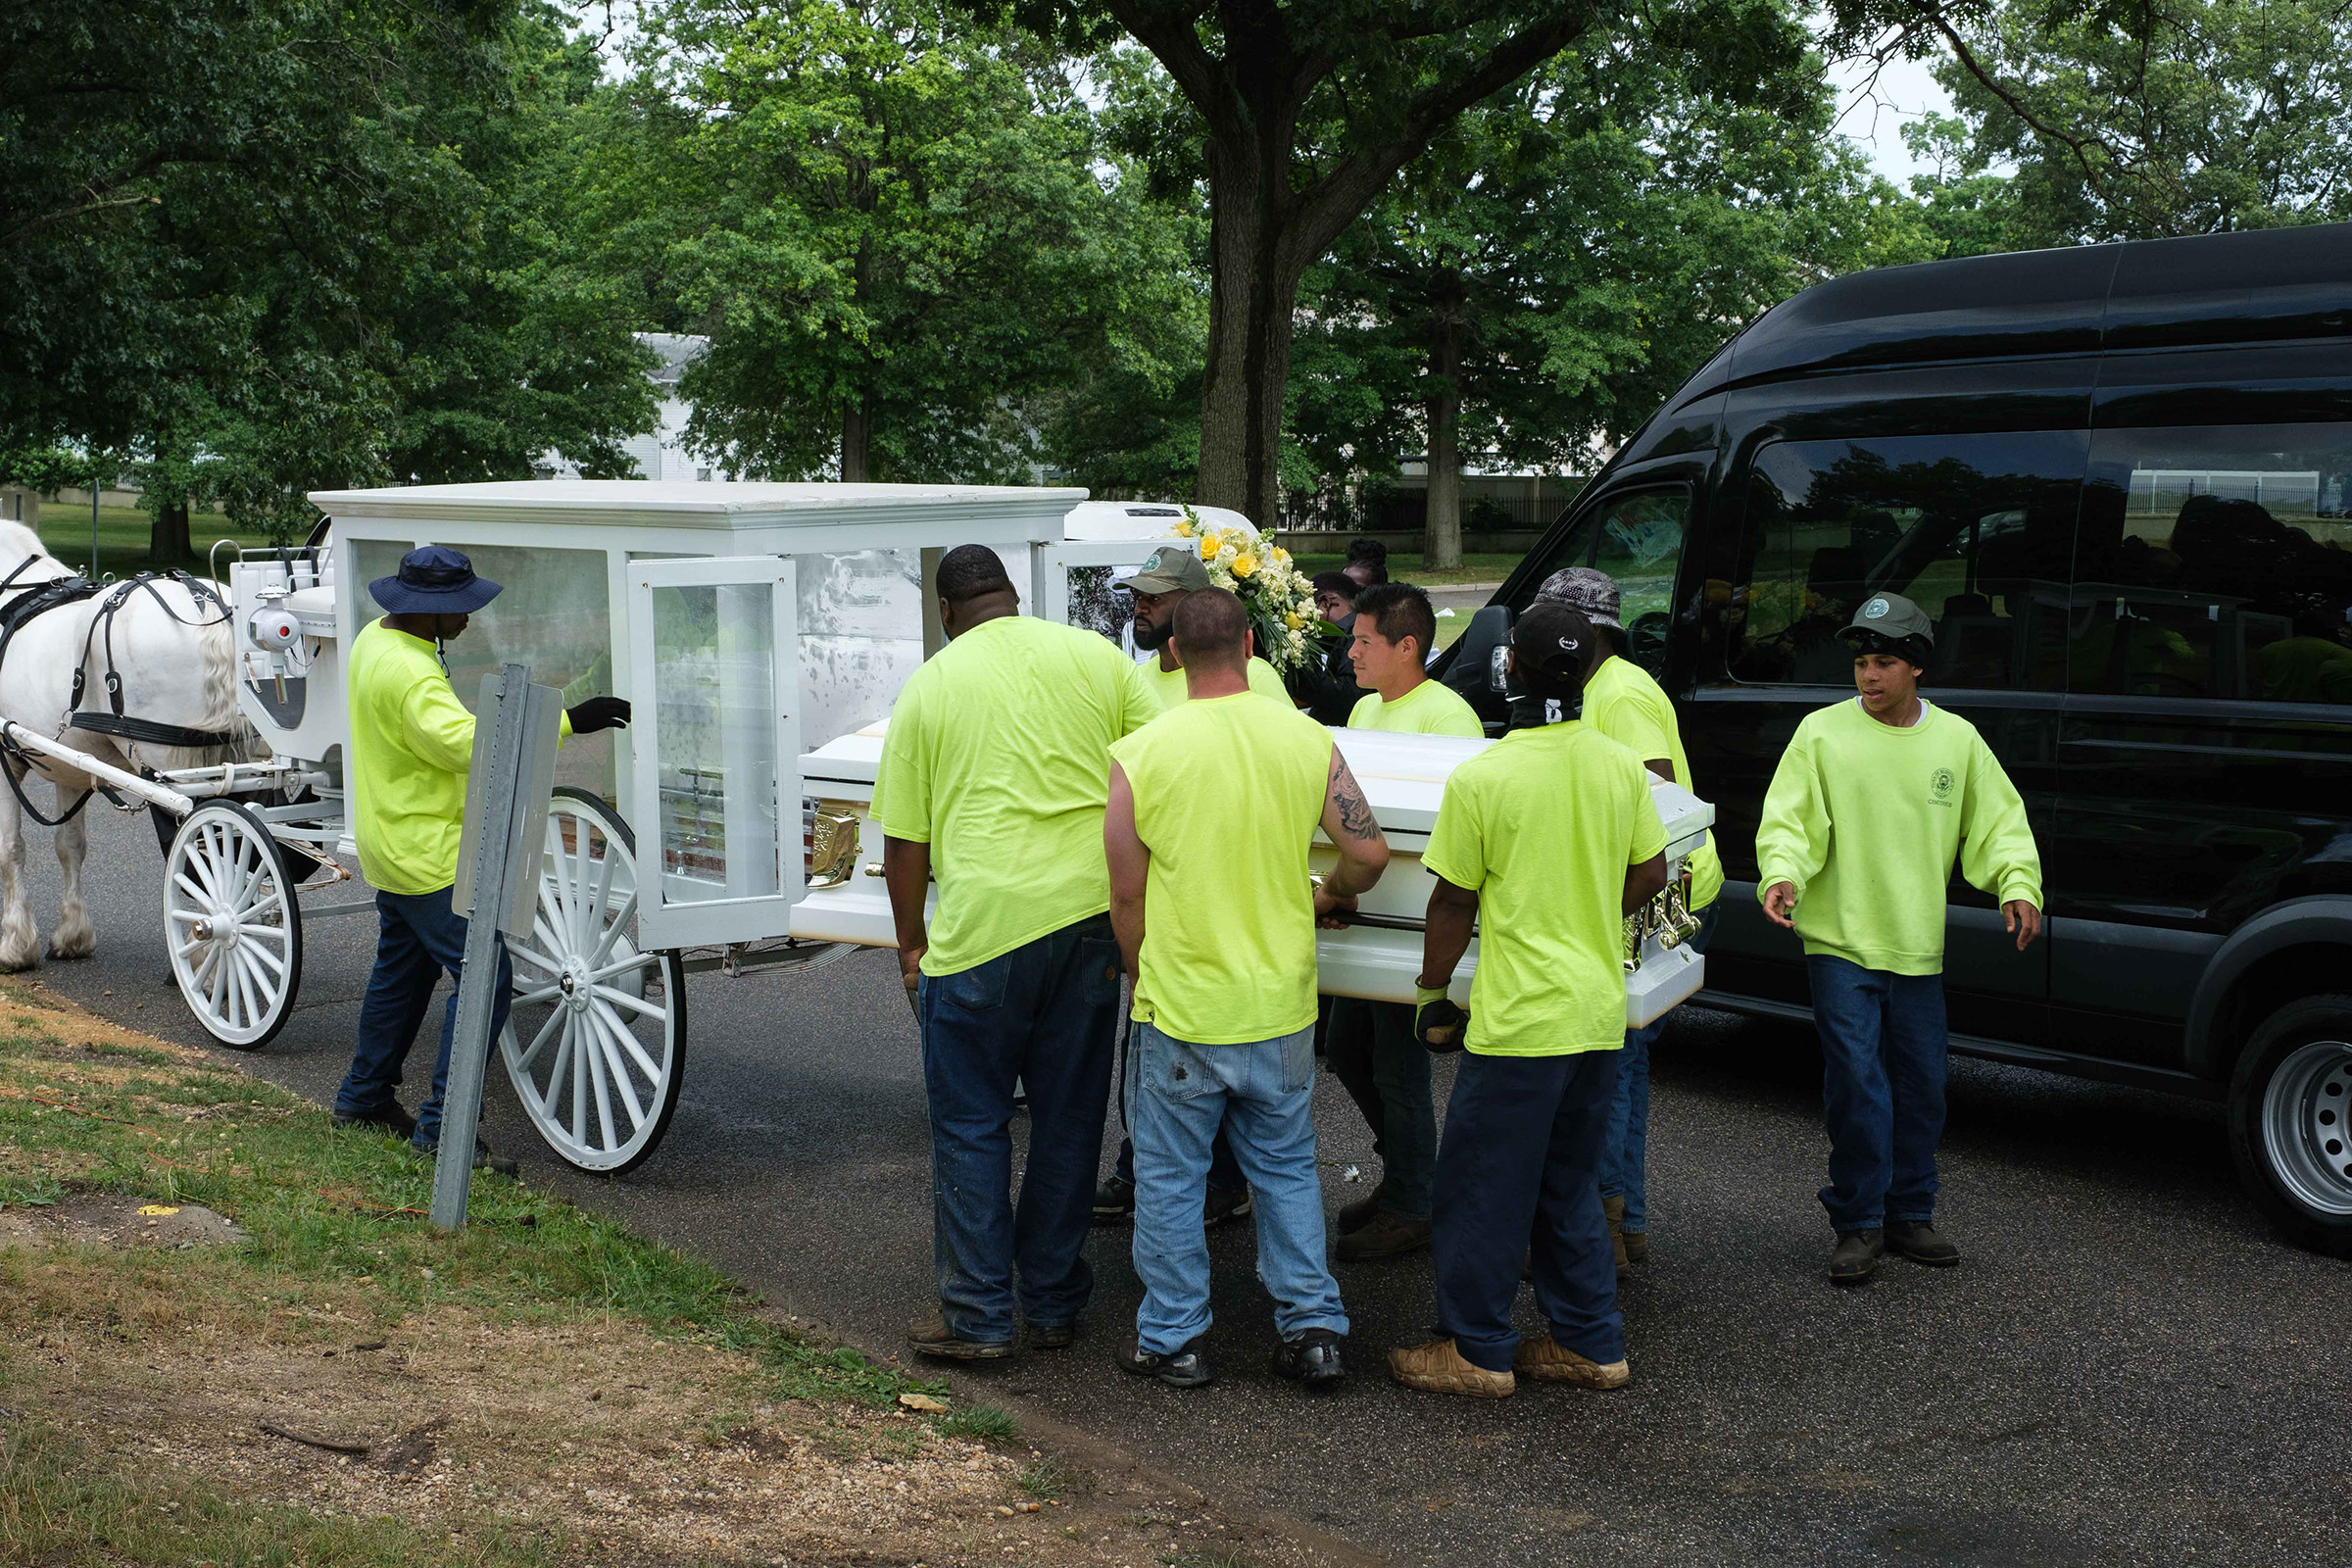 Cemetery workers carry Jamel Floyd’s coffin to the burial site at Greenfield Cemetery in Hempstead, N.Y., on June 30.